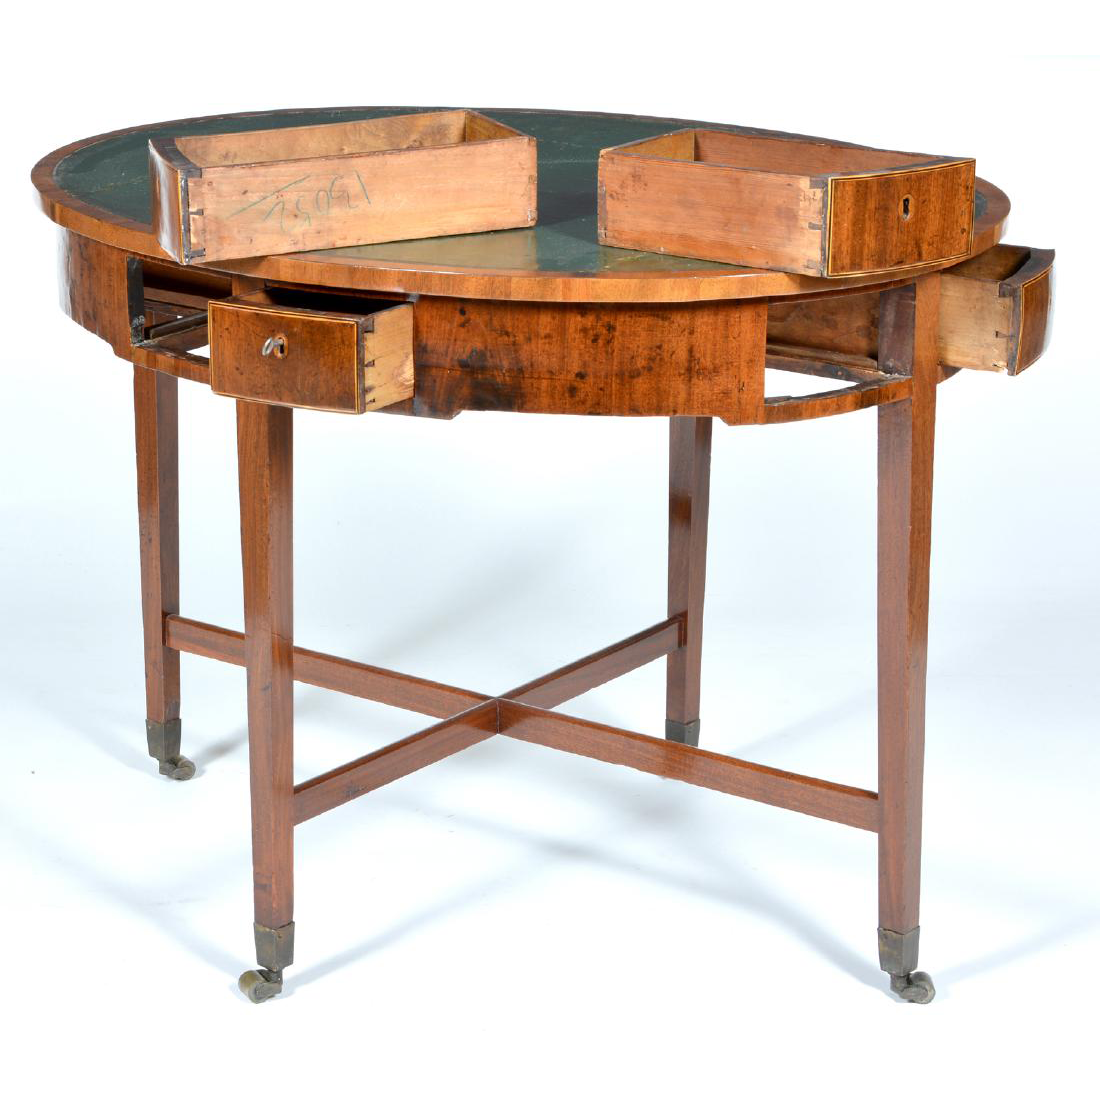 AF1-153: ANTIQUE EARLY 19TH CENTURY ENGLISH MAHOGANY LEATHER TOP RENT OR GAME TABLE